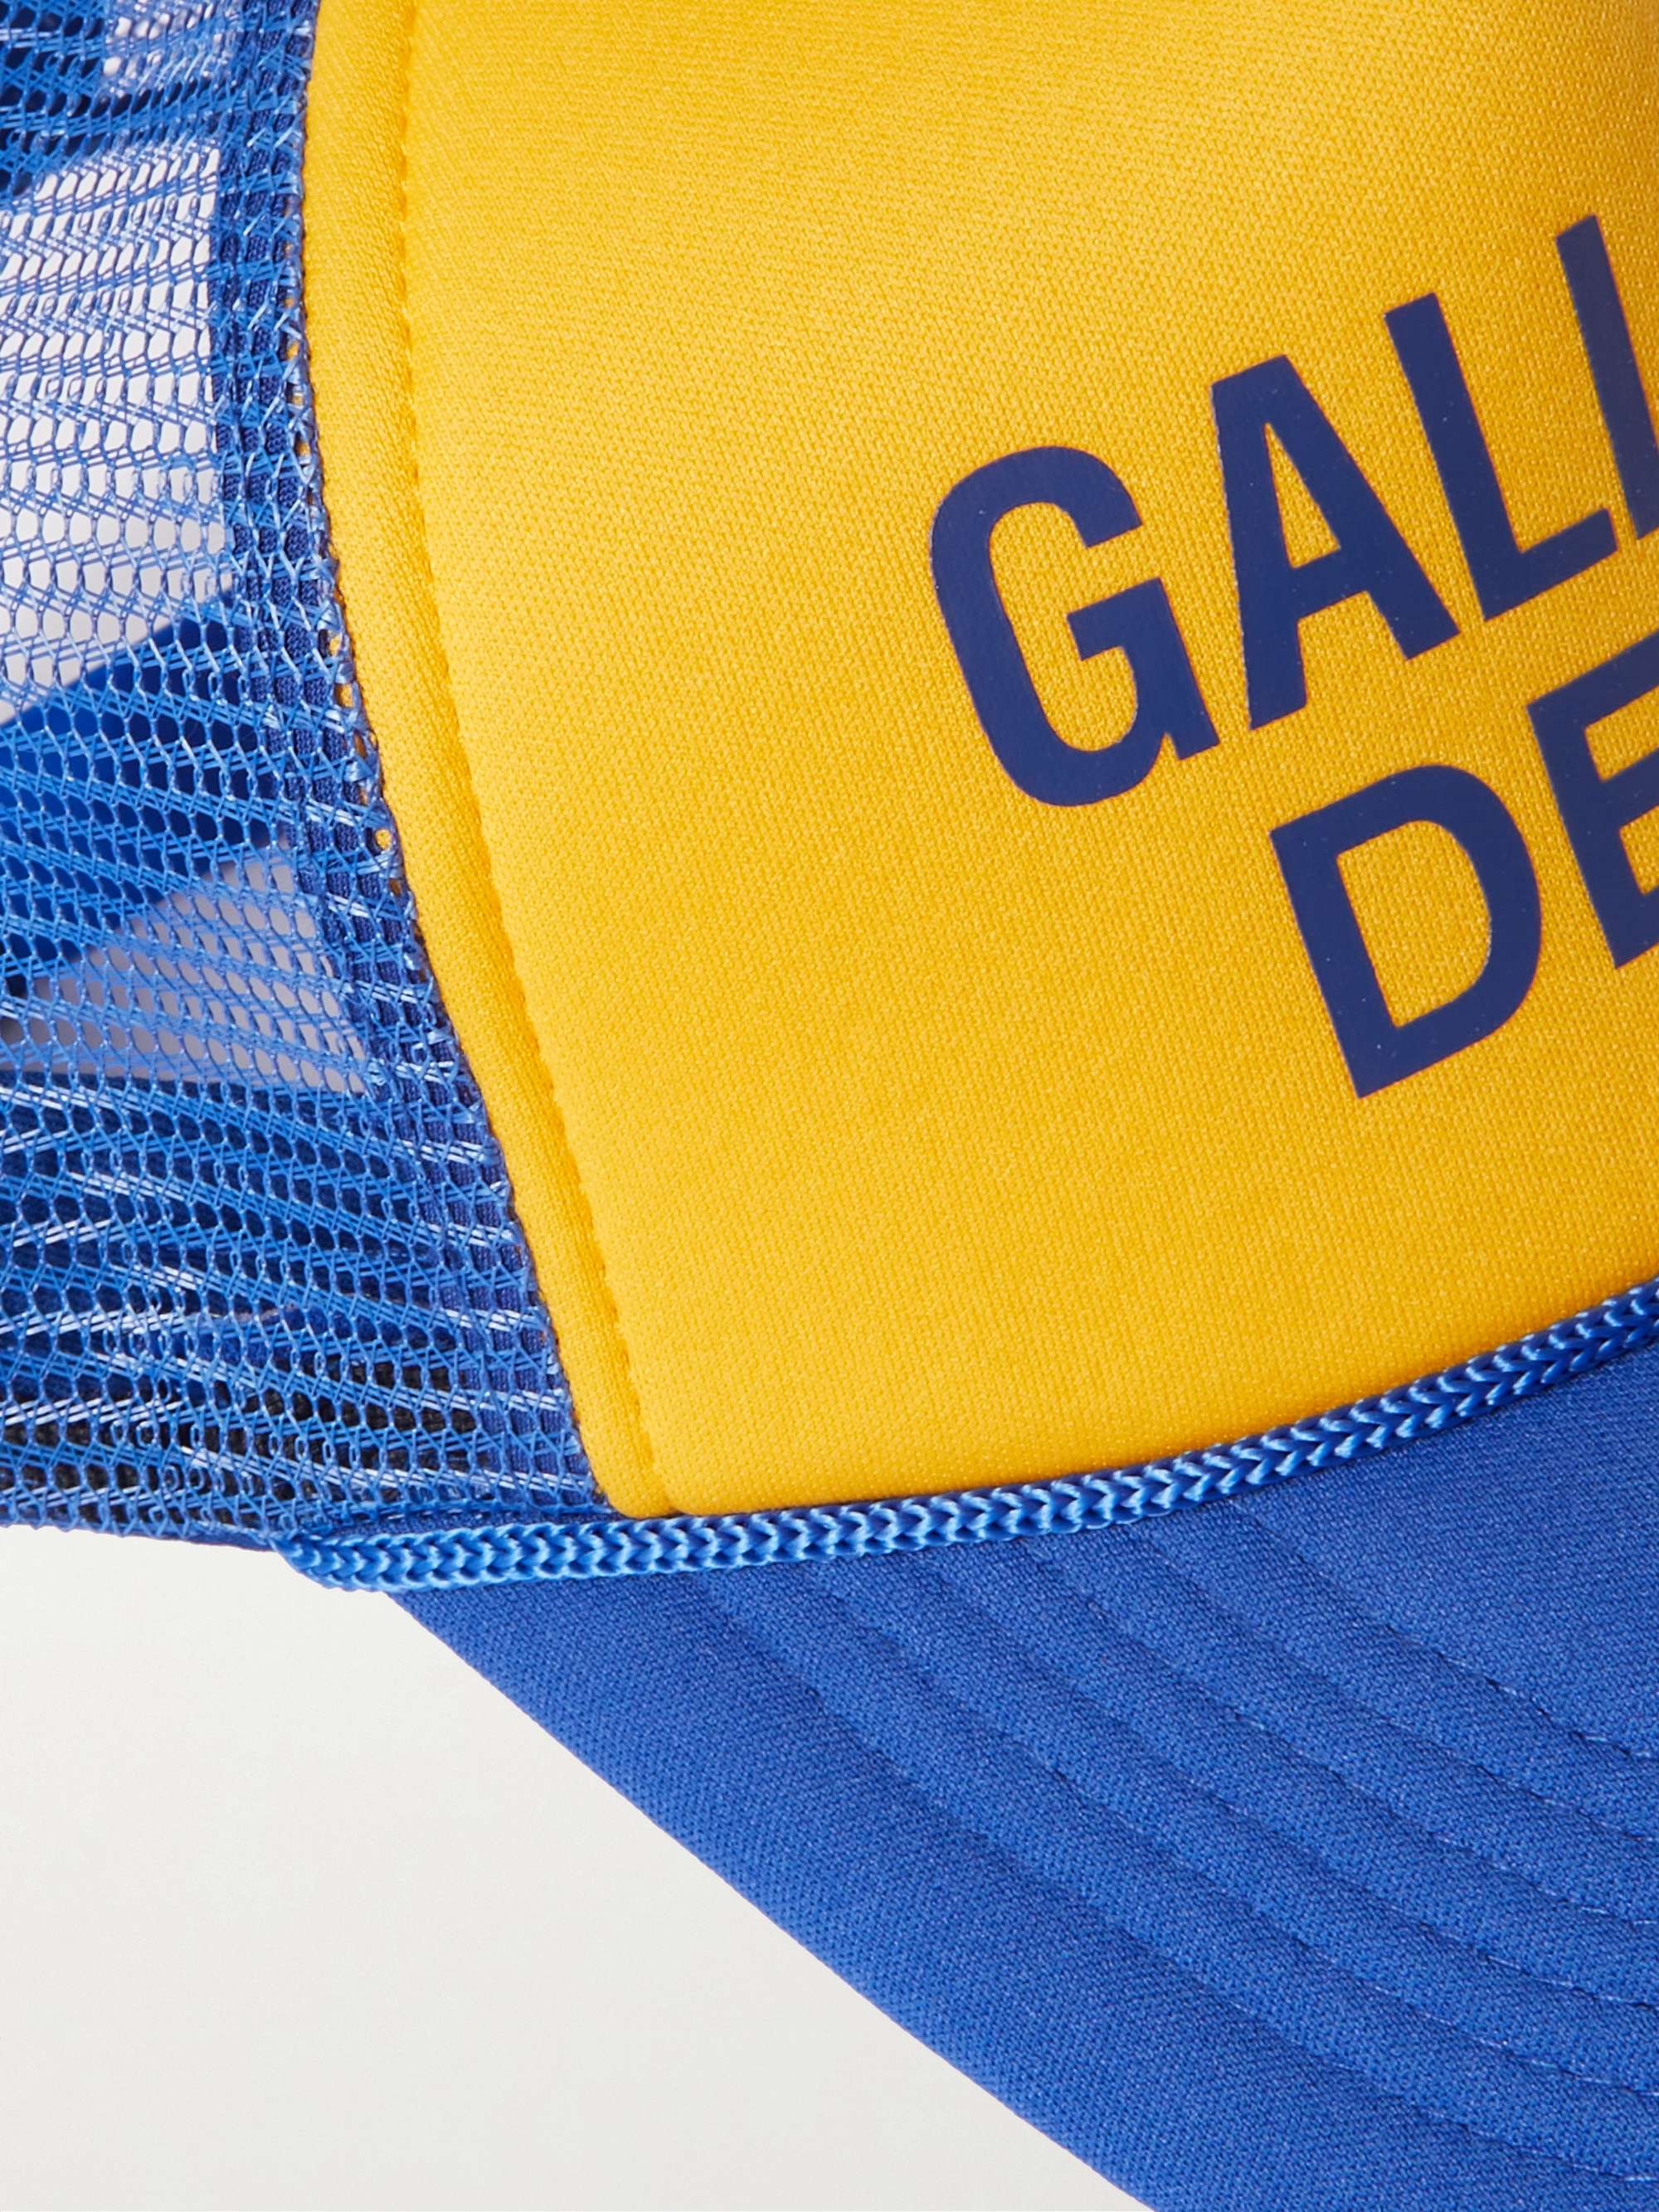 GALLERY DEPT. Printed Two-Tone Twill and Mesh Trucker Cap